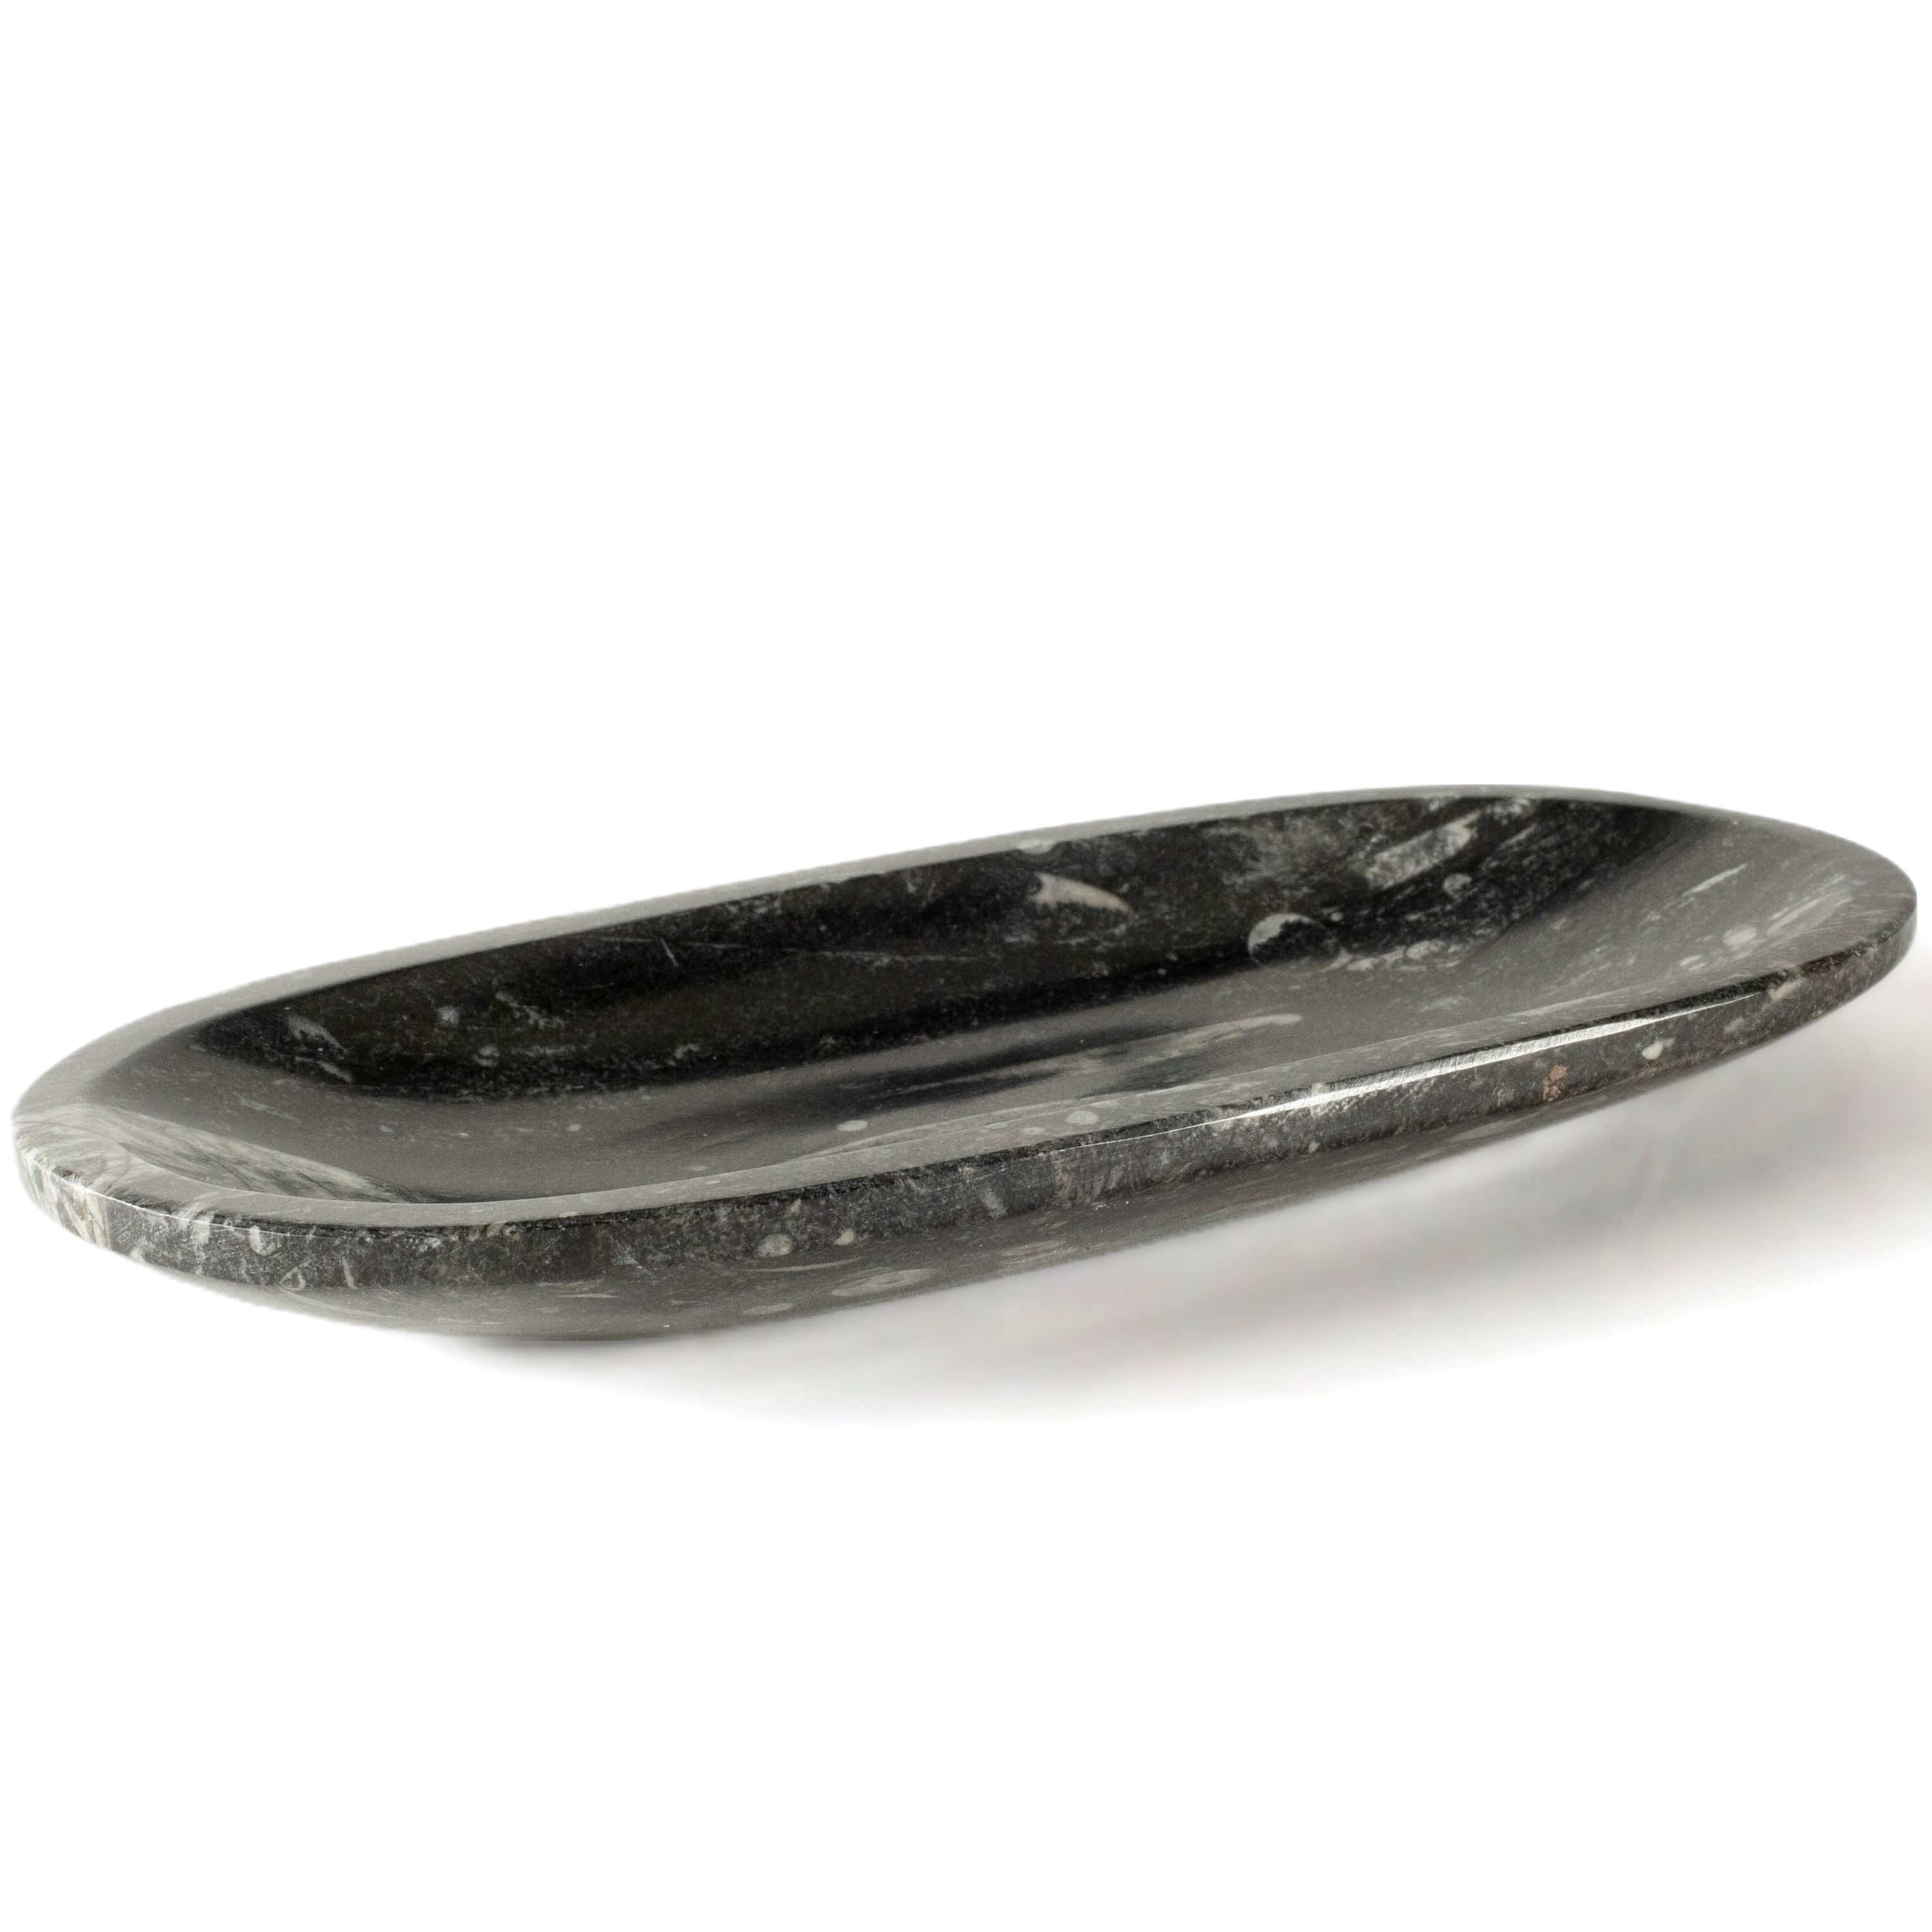 Kalifano Fossils & Minerals Natural Black Orthoceras Oval Bowl from Morocco - 7.5" BORO120